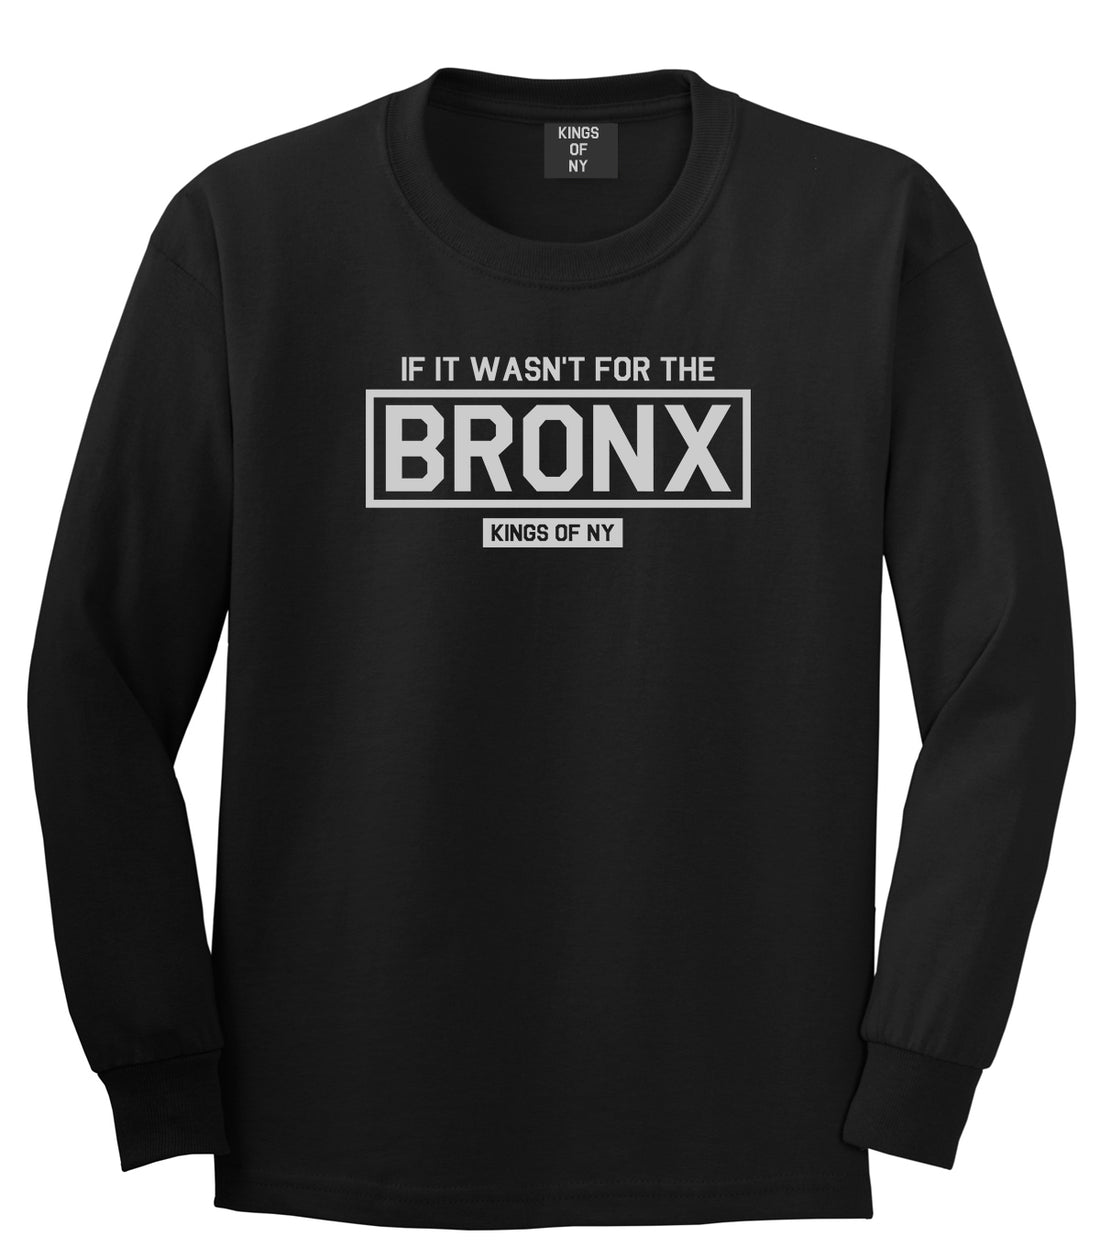 If It Wasnt For The Bronx Mens Long Sleeve T-Shirt Black by Kings Of NY